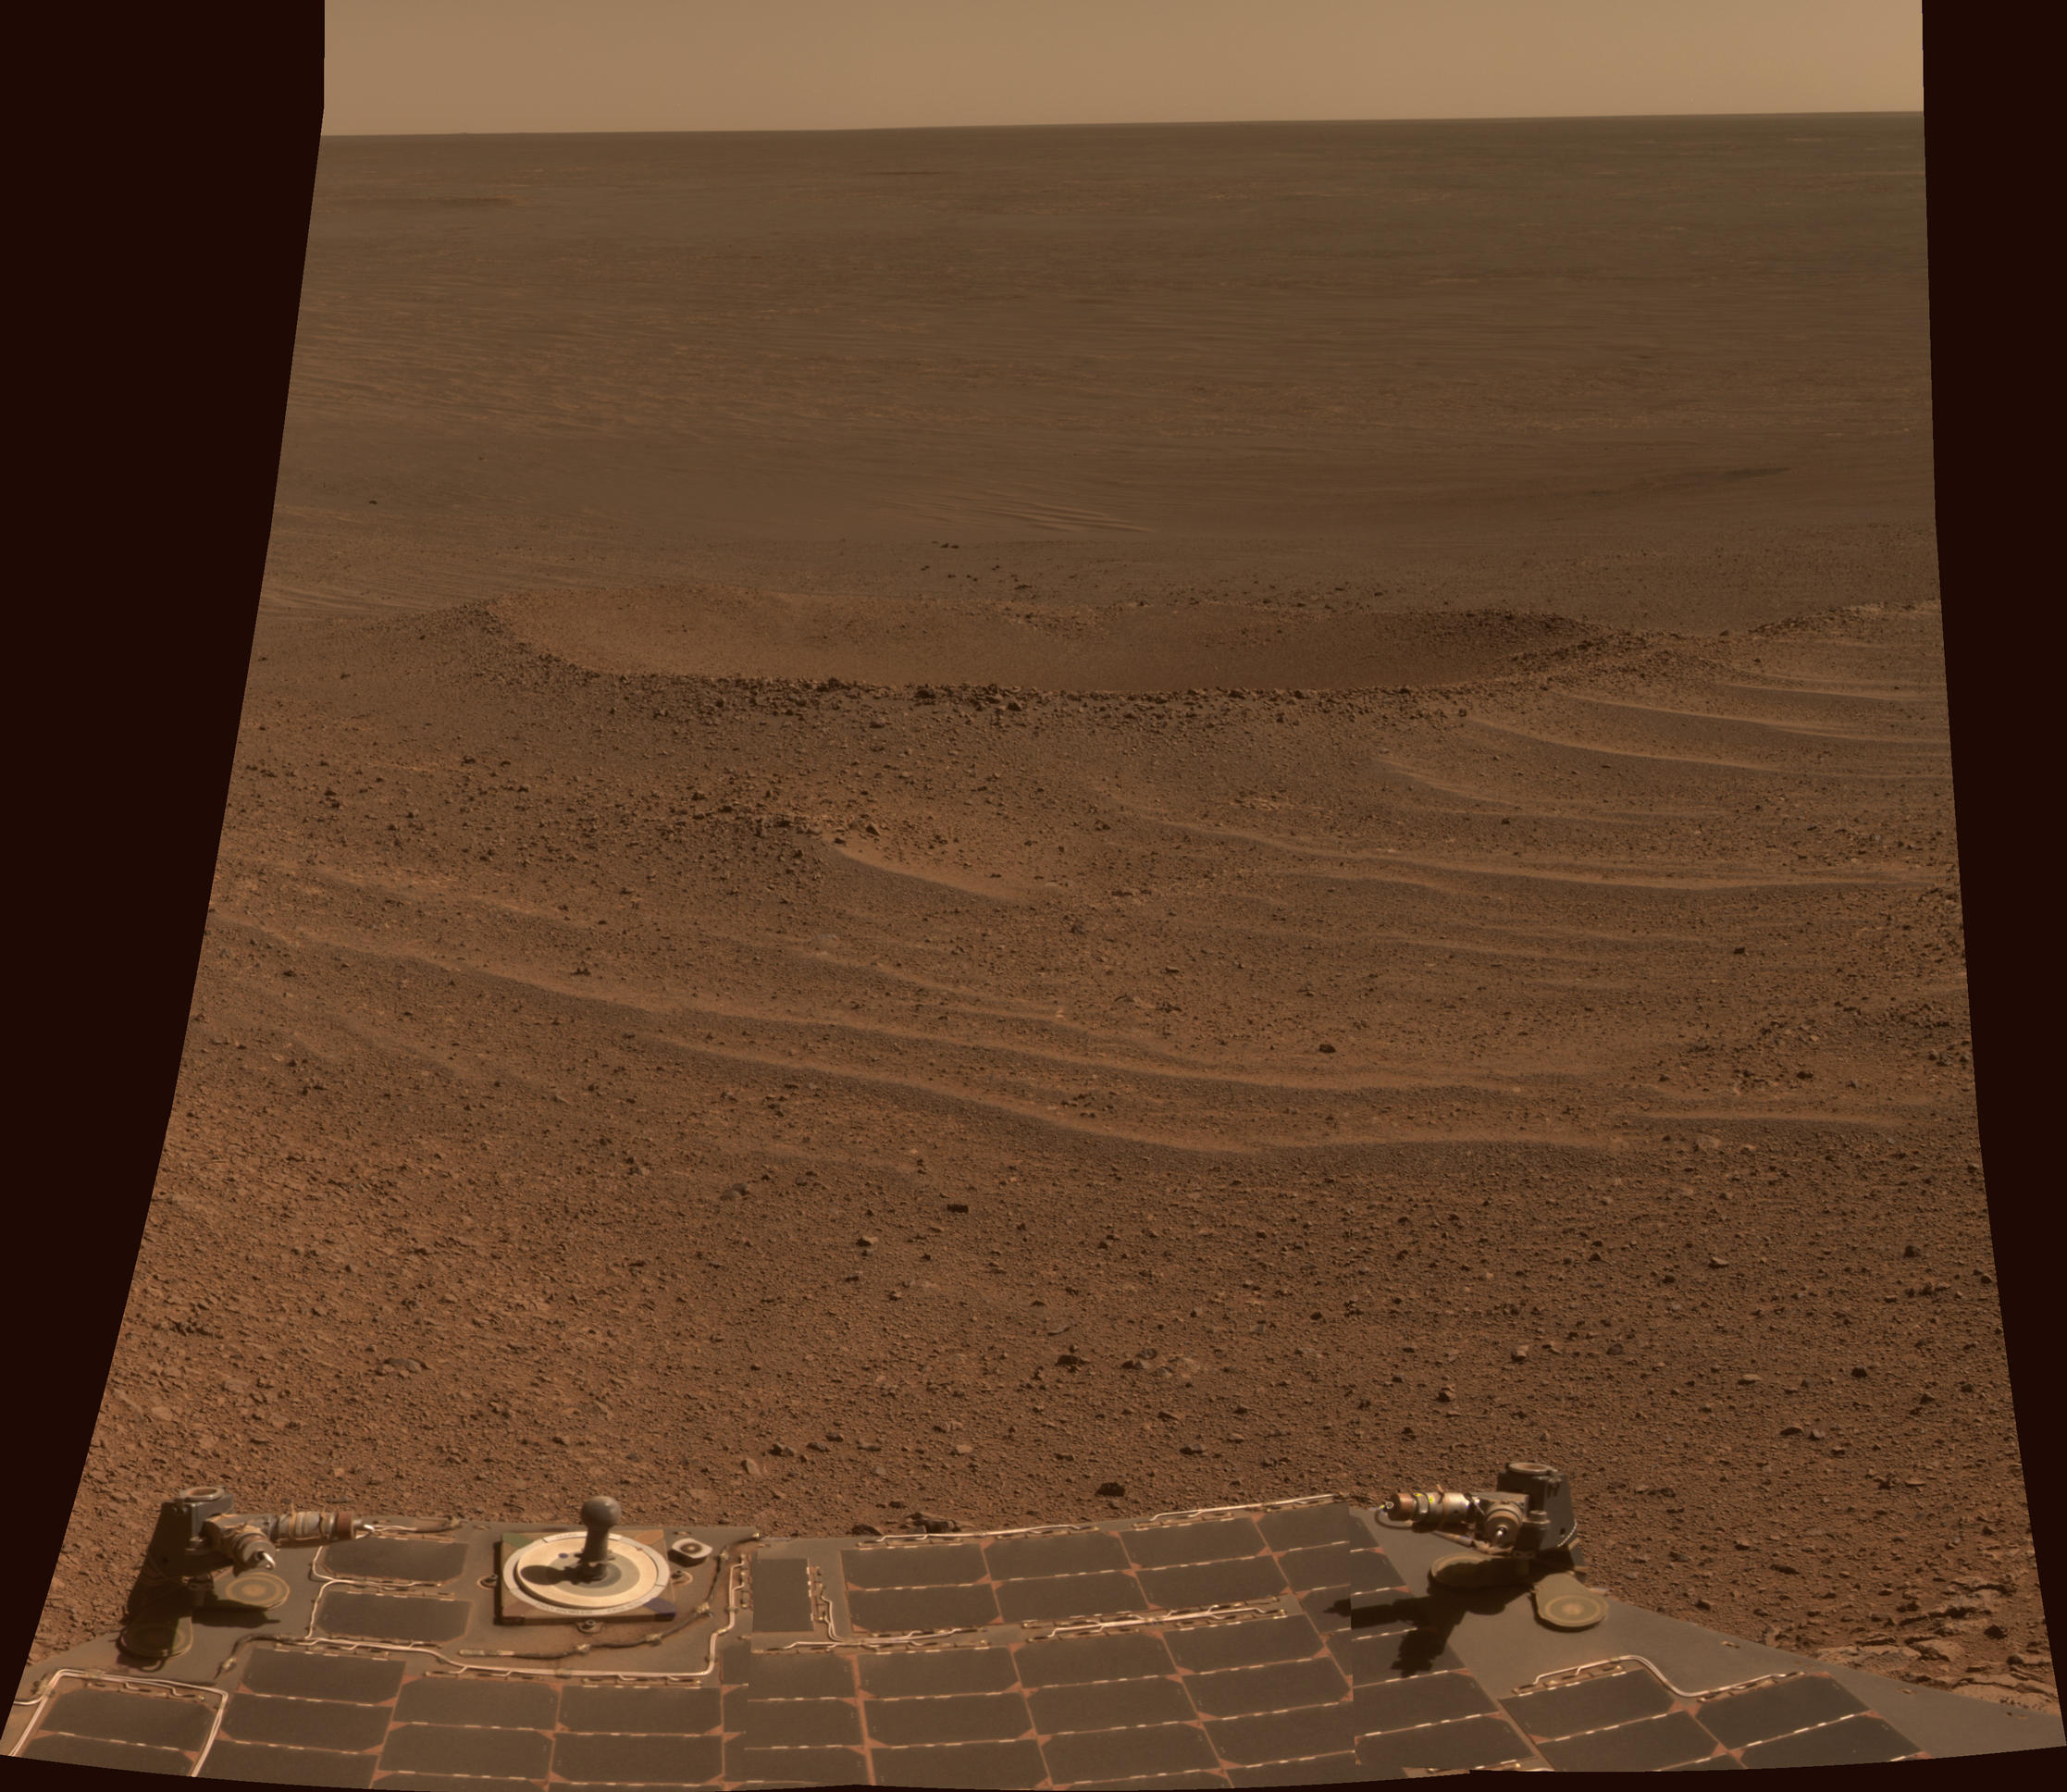 This scene from NASA's Mars Exploration Rover Opportunity shows "Lunokhod 2 Crater," which lies south of "Solander Point" on the west rim of Endeavour Crater.